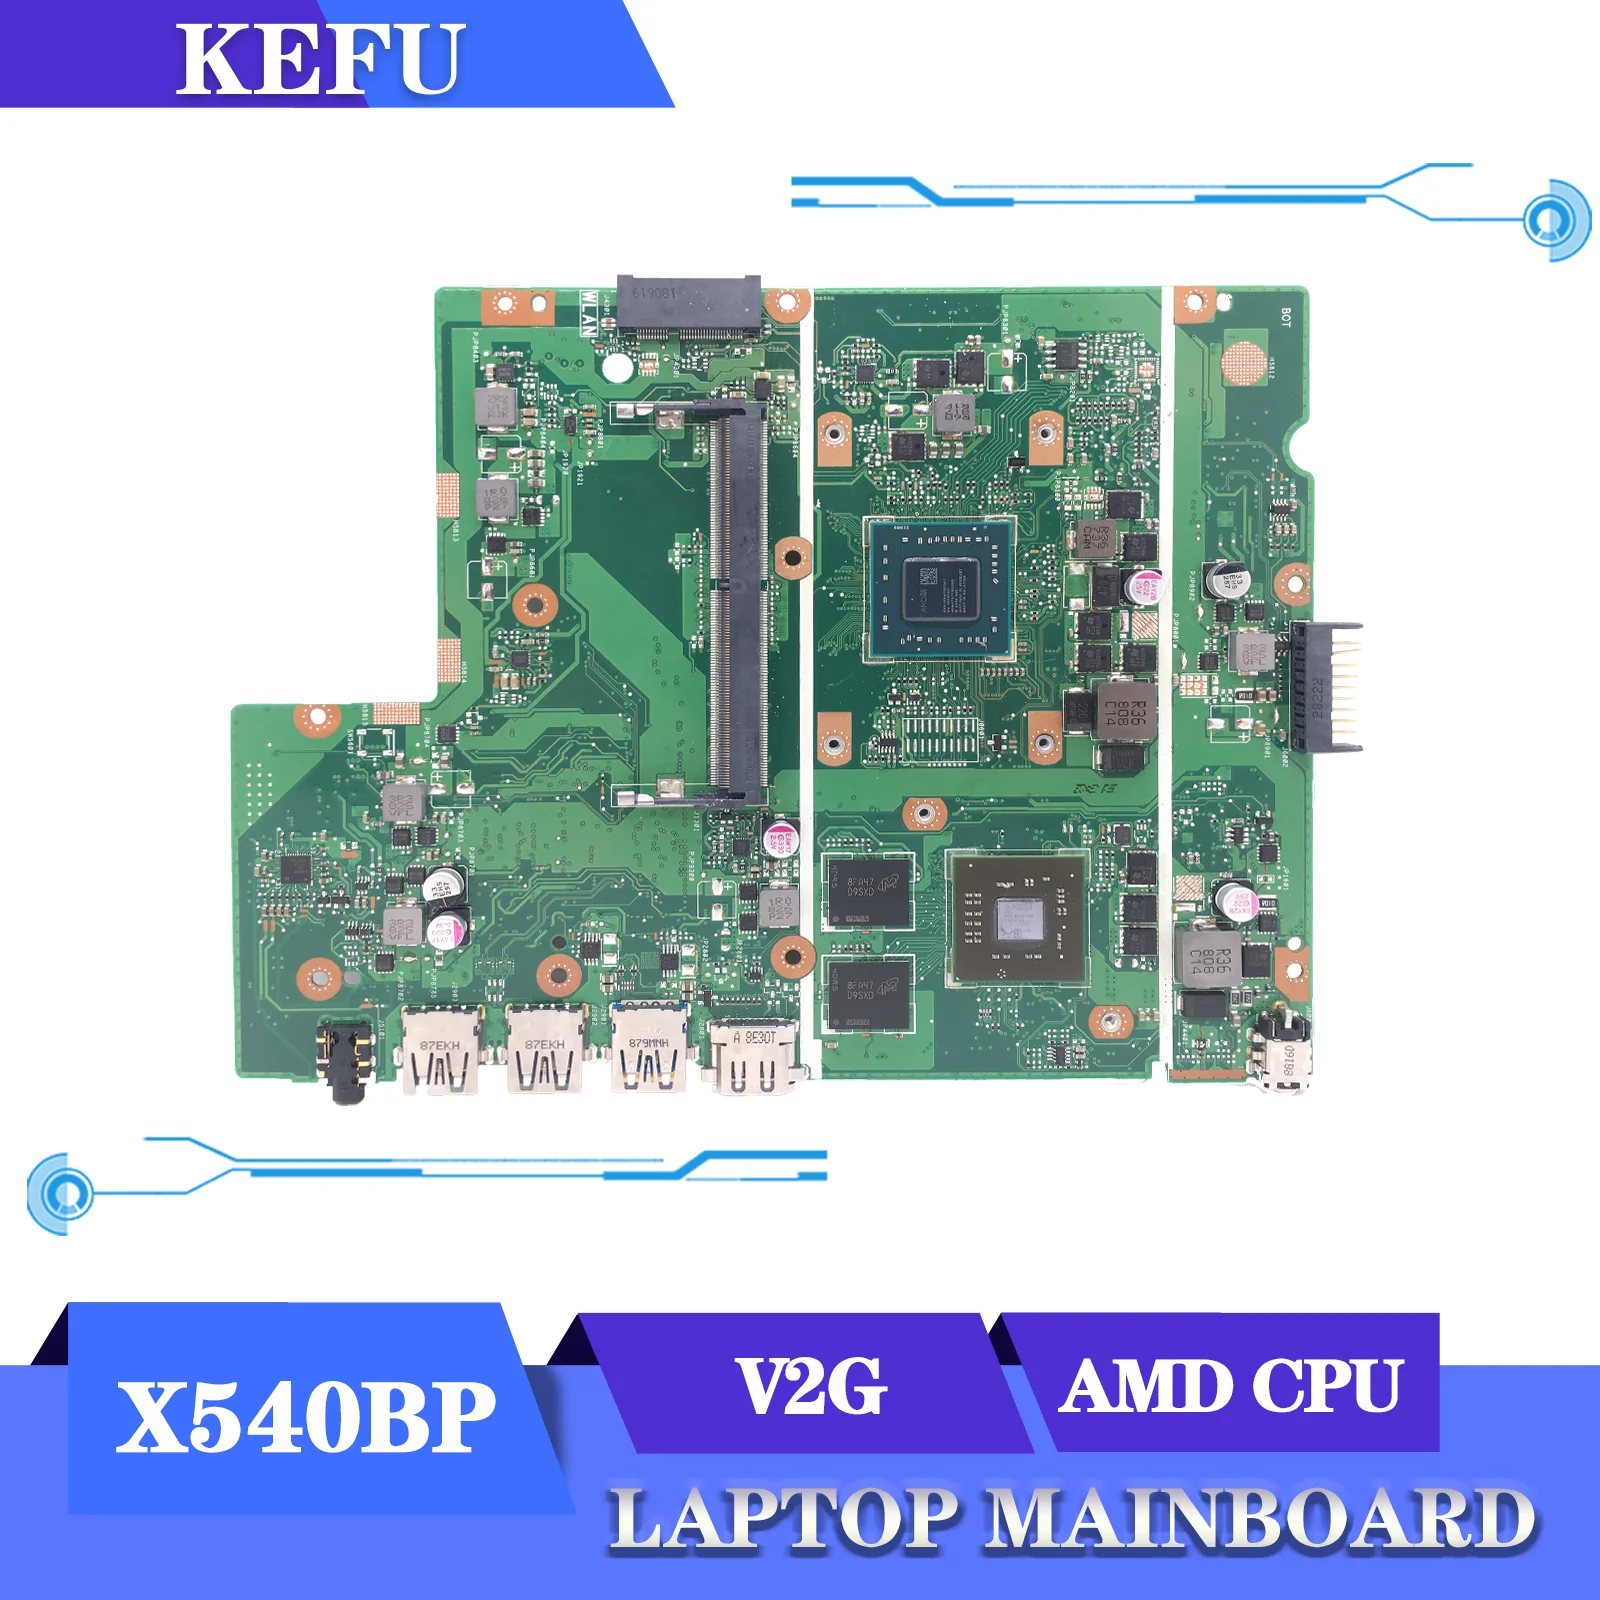 

KEFU X540BP Mainboard For ASUS X540BP X540BA X540B Laptop Motherboard With A6-9225 A9-9425/A9-9420 R5-M420/V2G